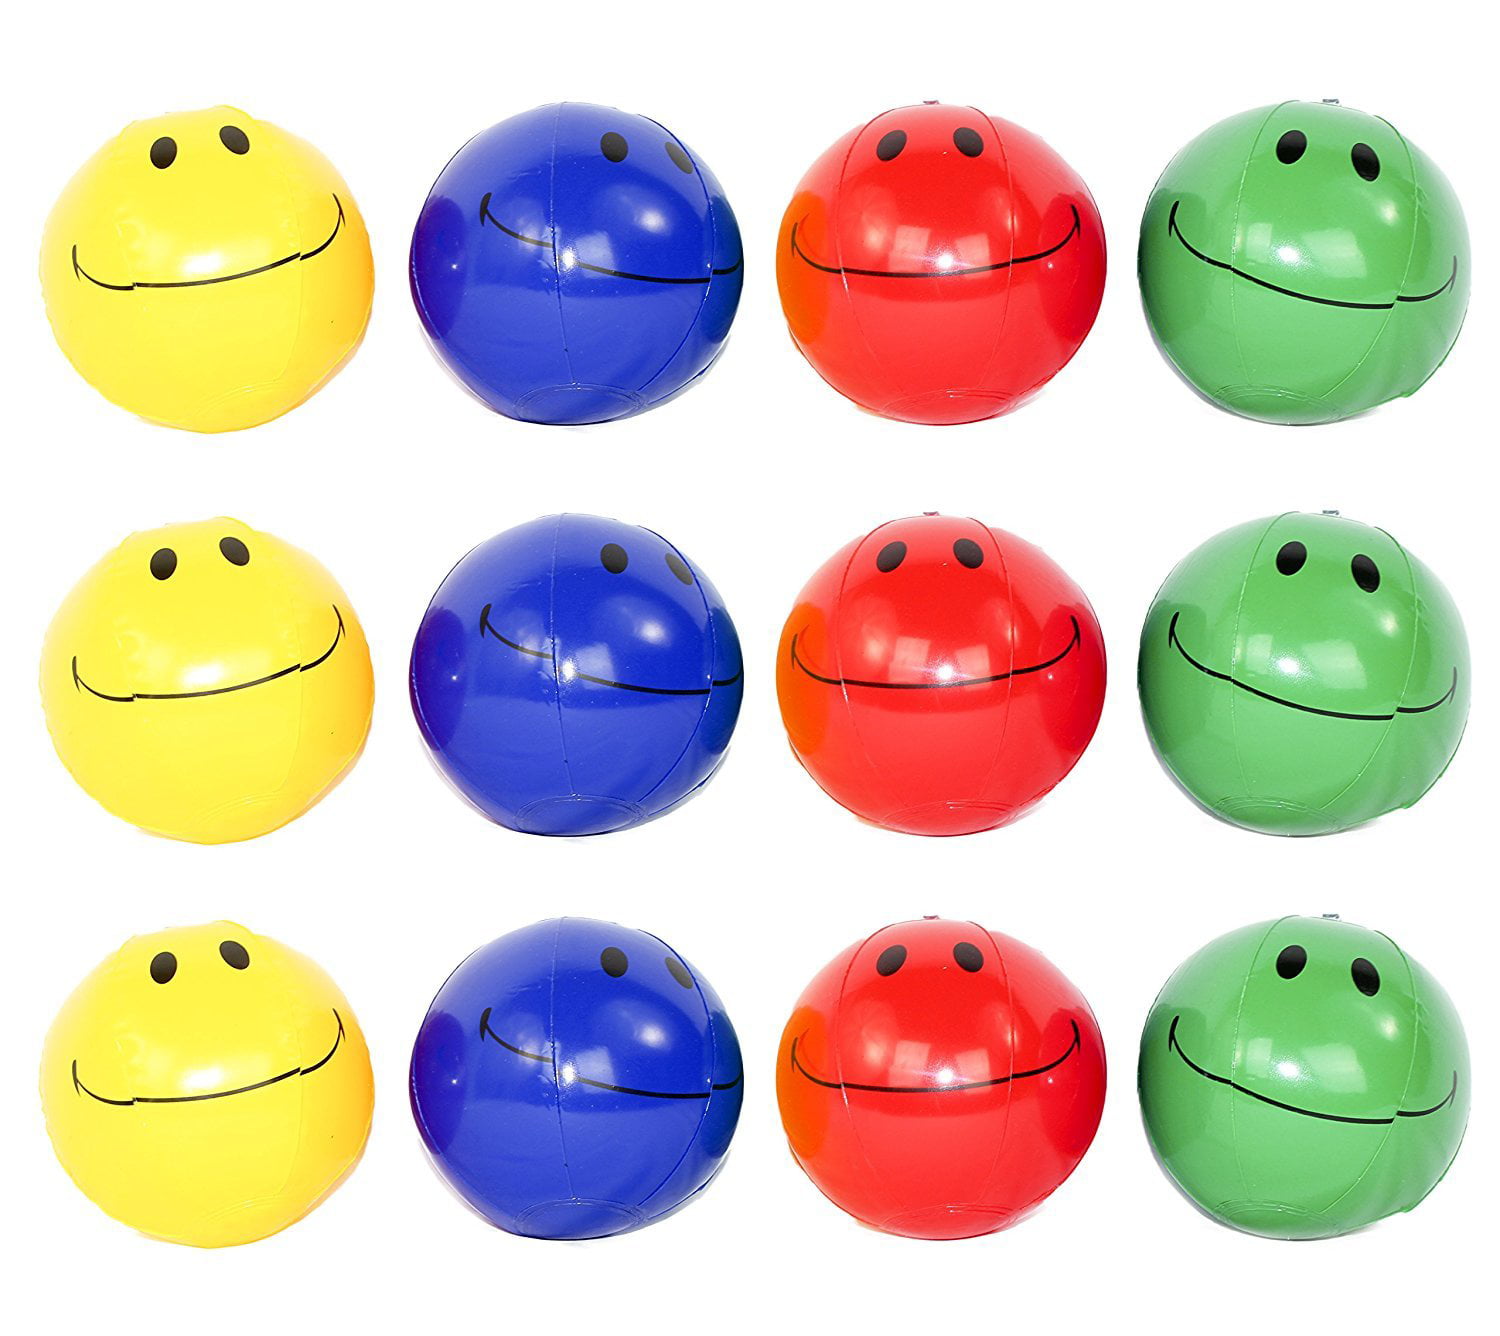 6 NEW MINI SMILE FACE BEACH BALLS 7" INFLATABLE POOL BEACHBALL PARTY FAVORS 